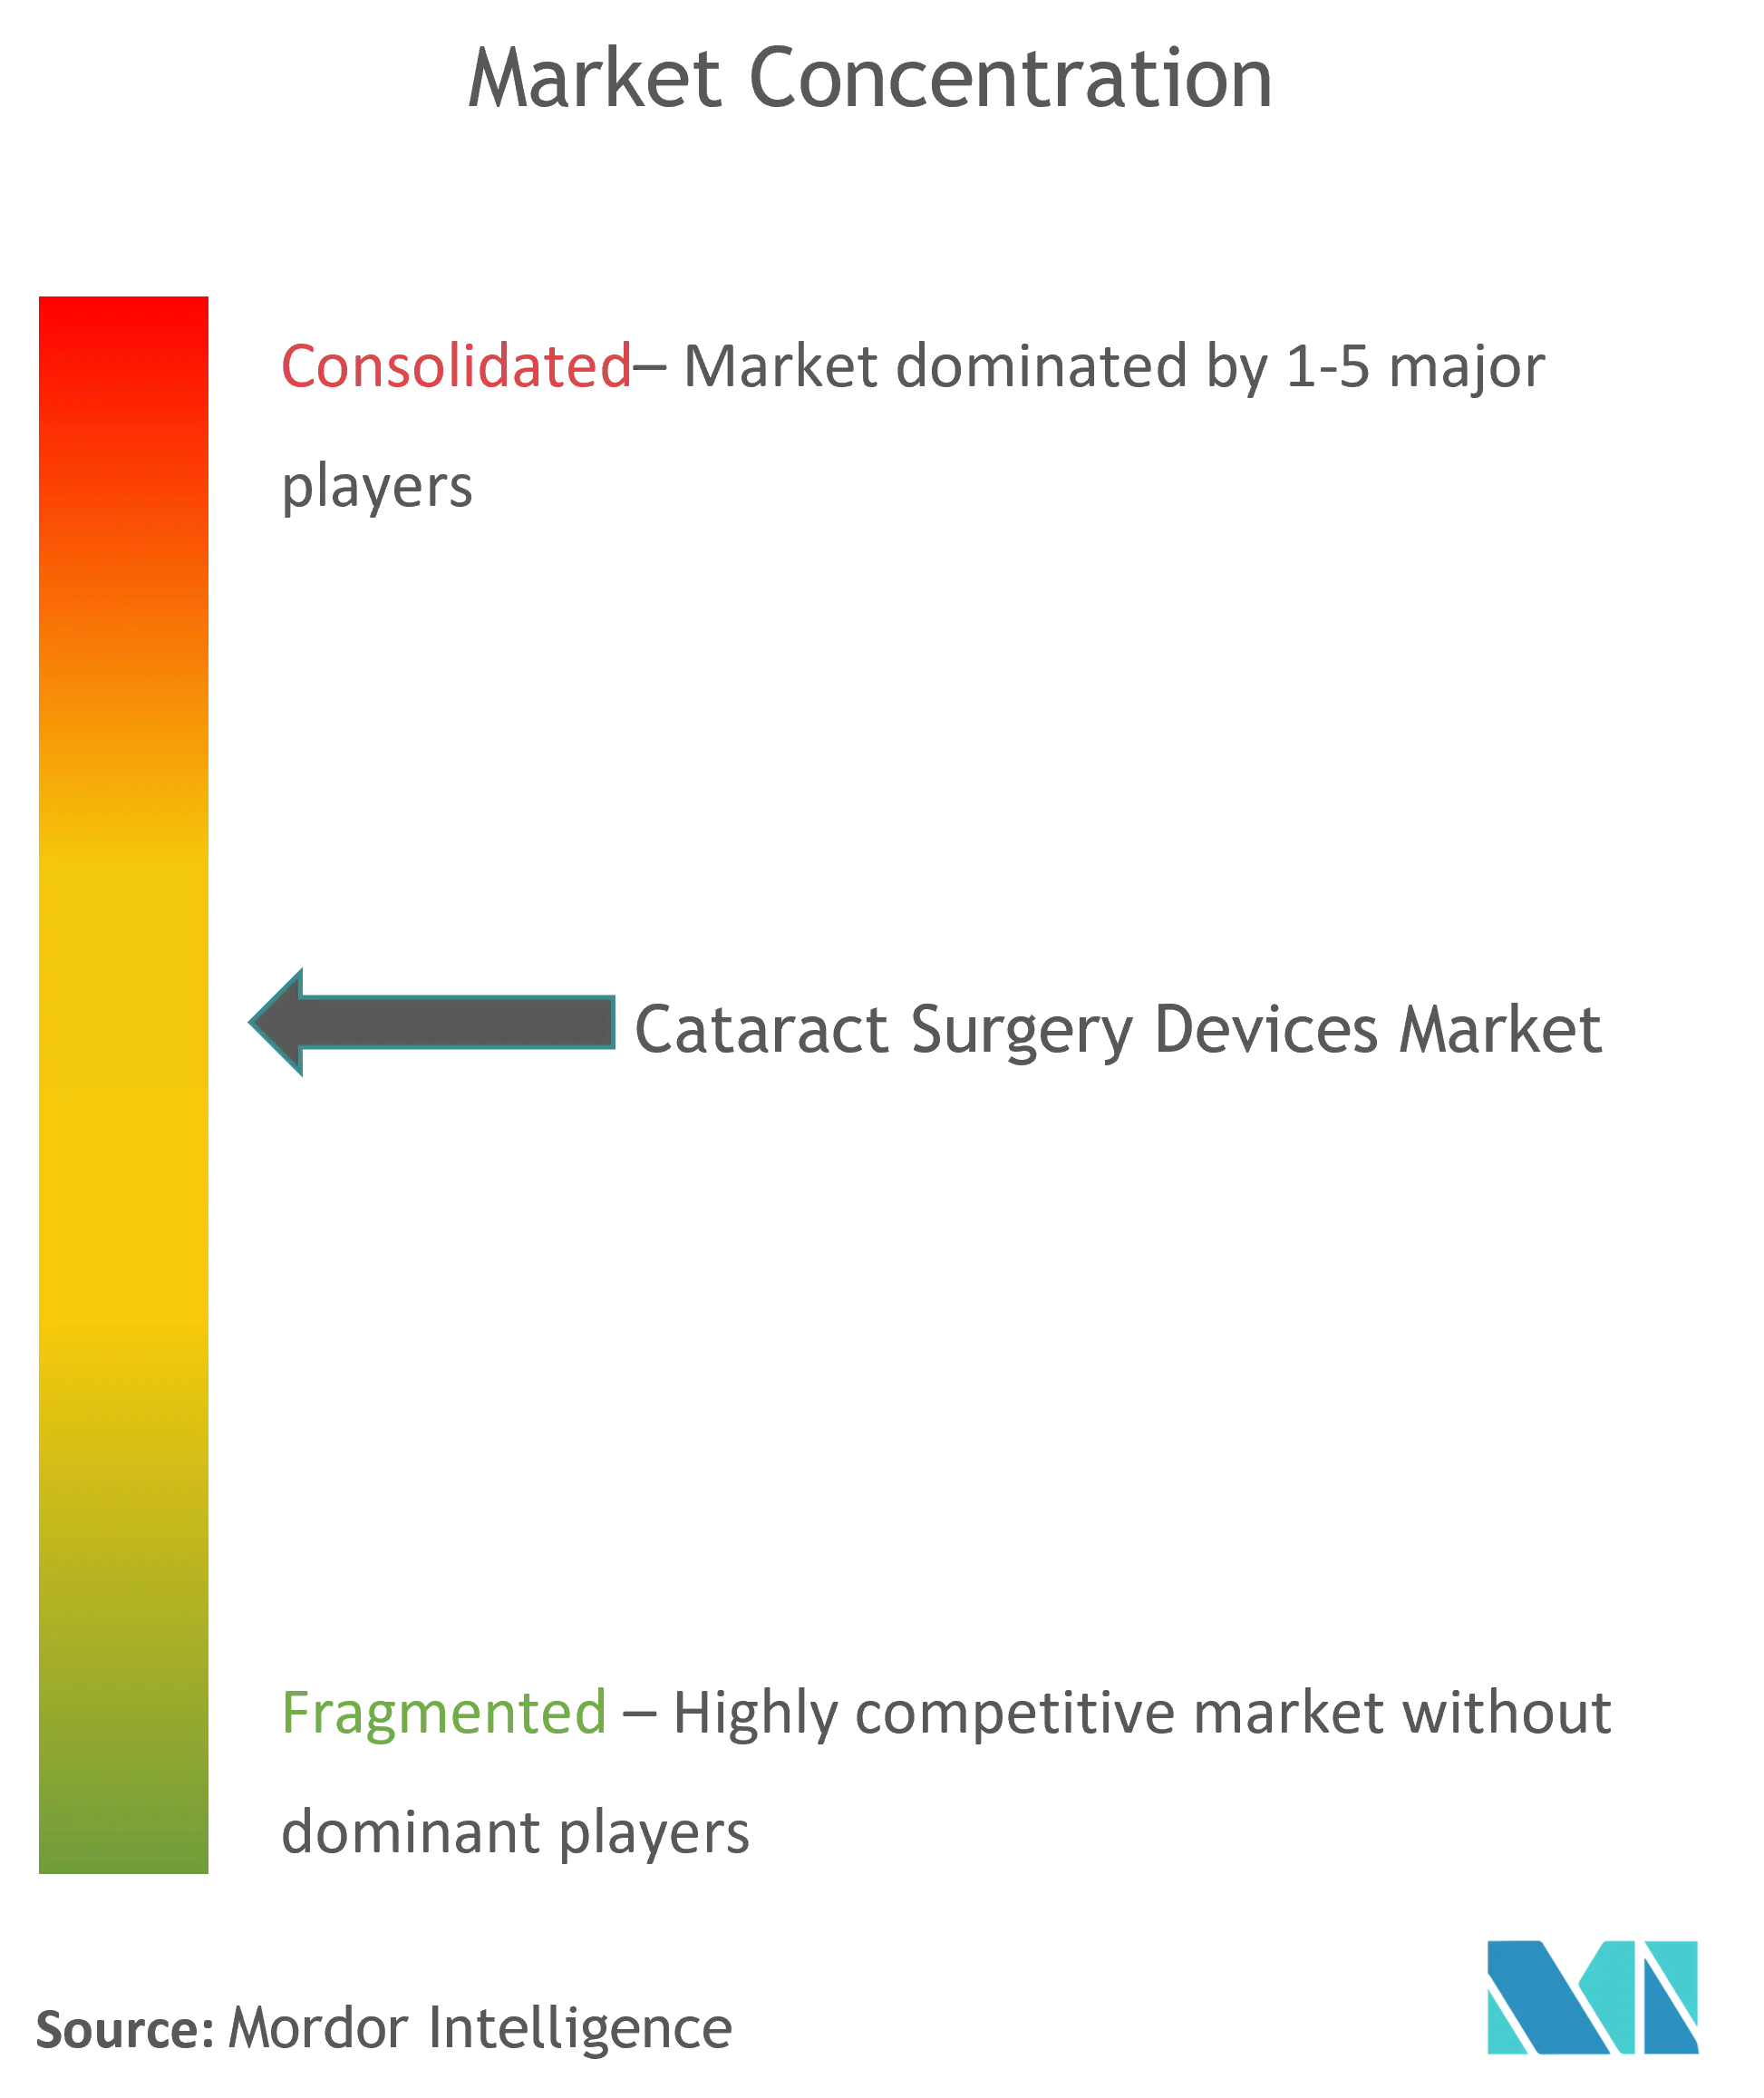 Cataract Surgery Devices Market Concentration